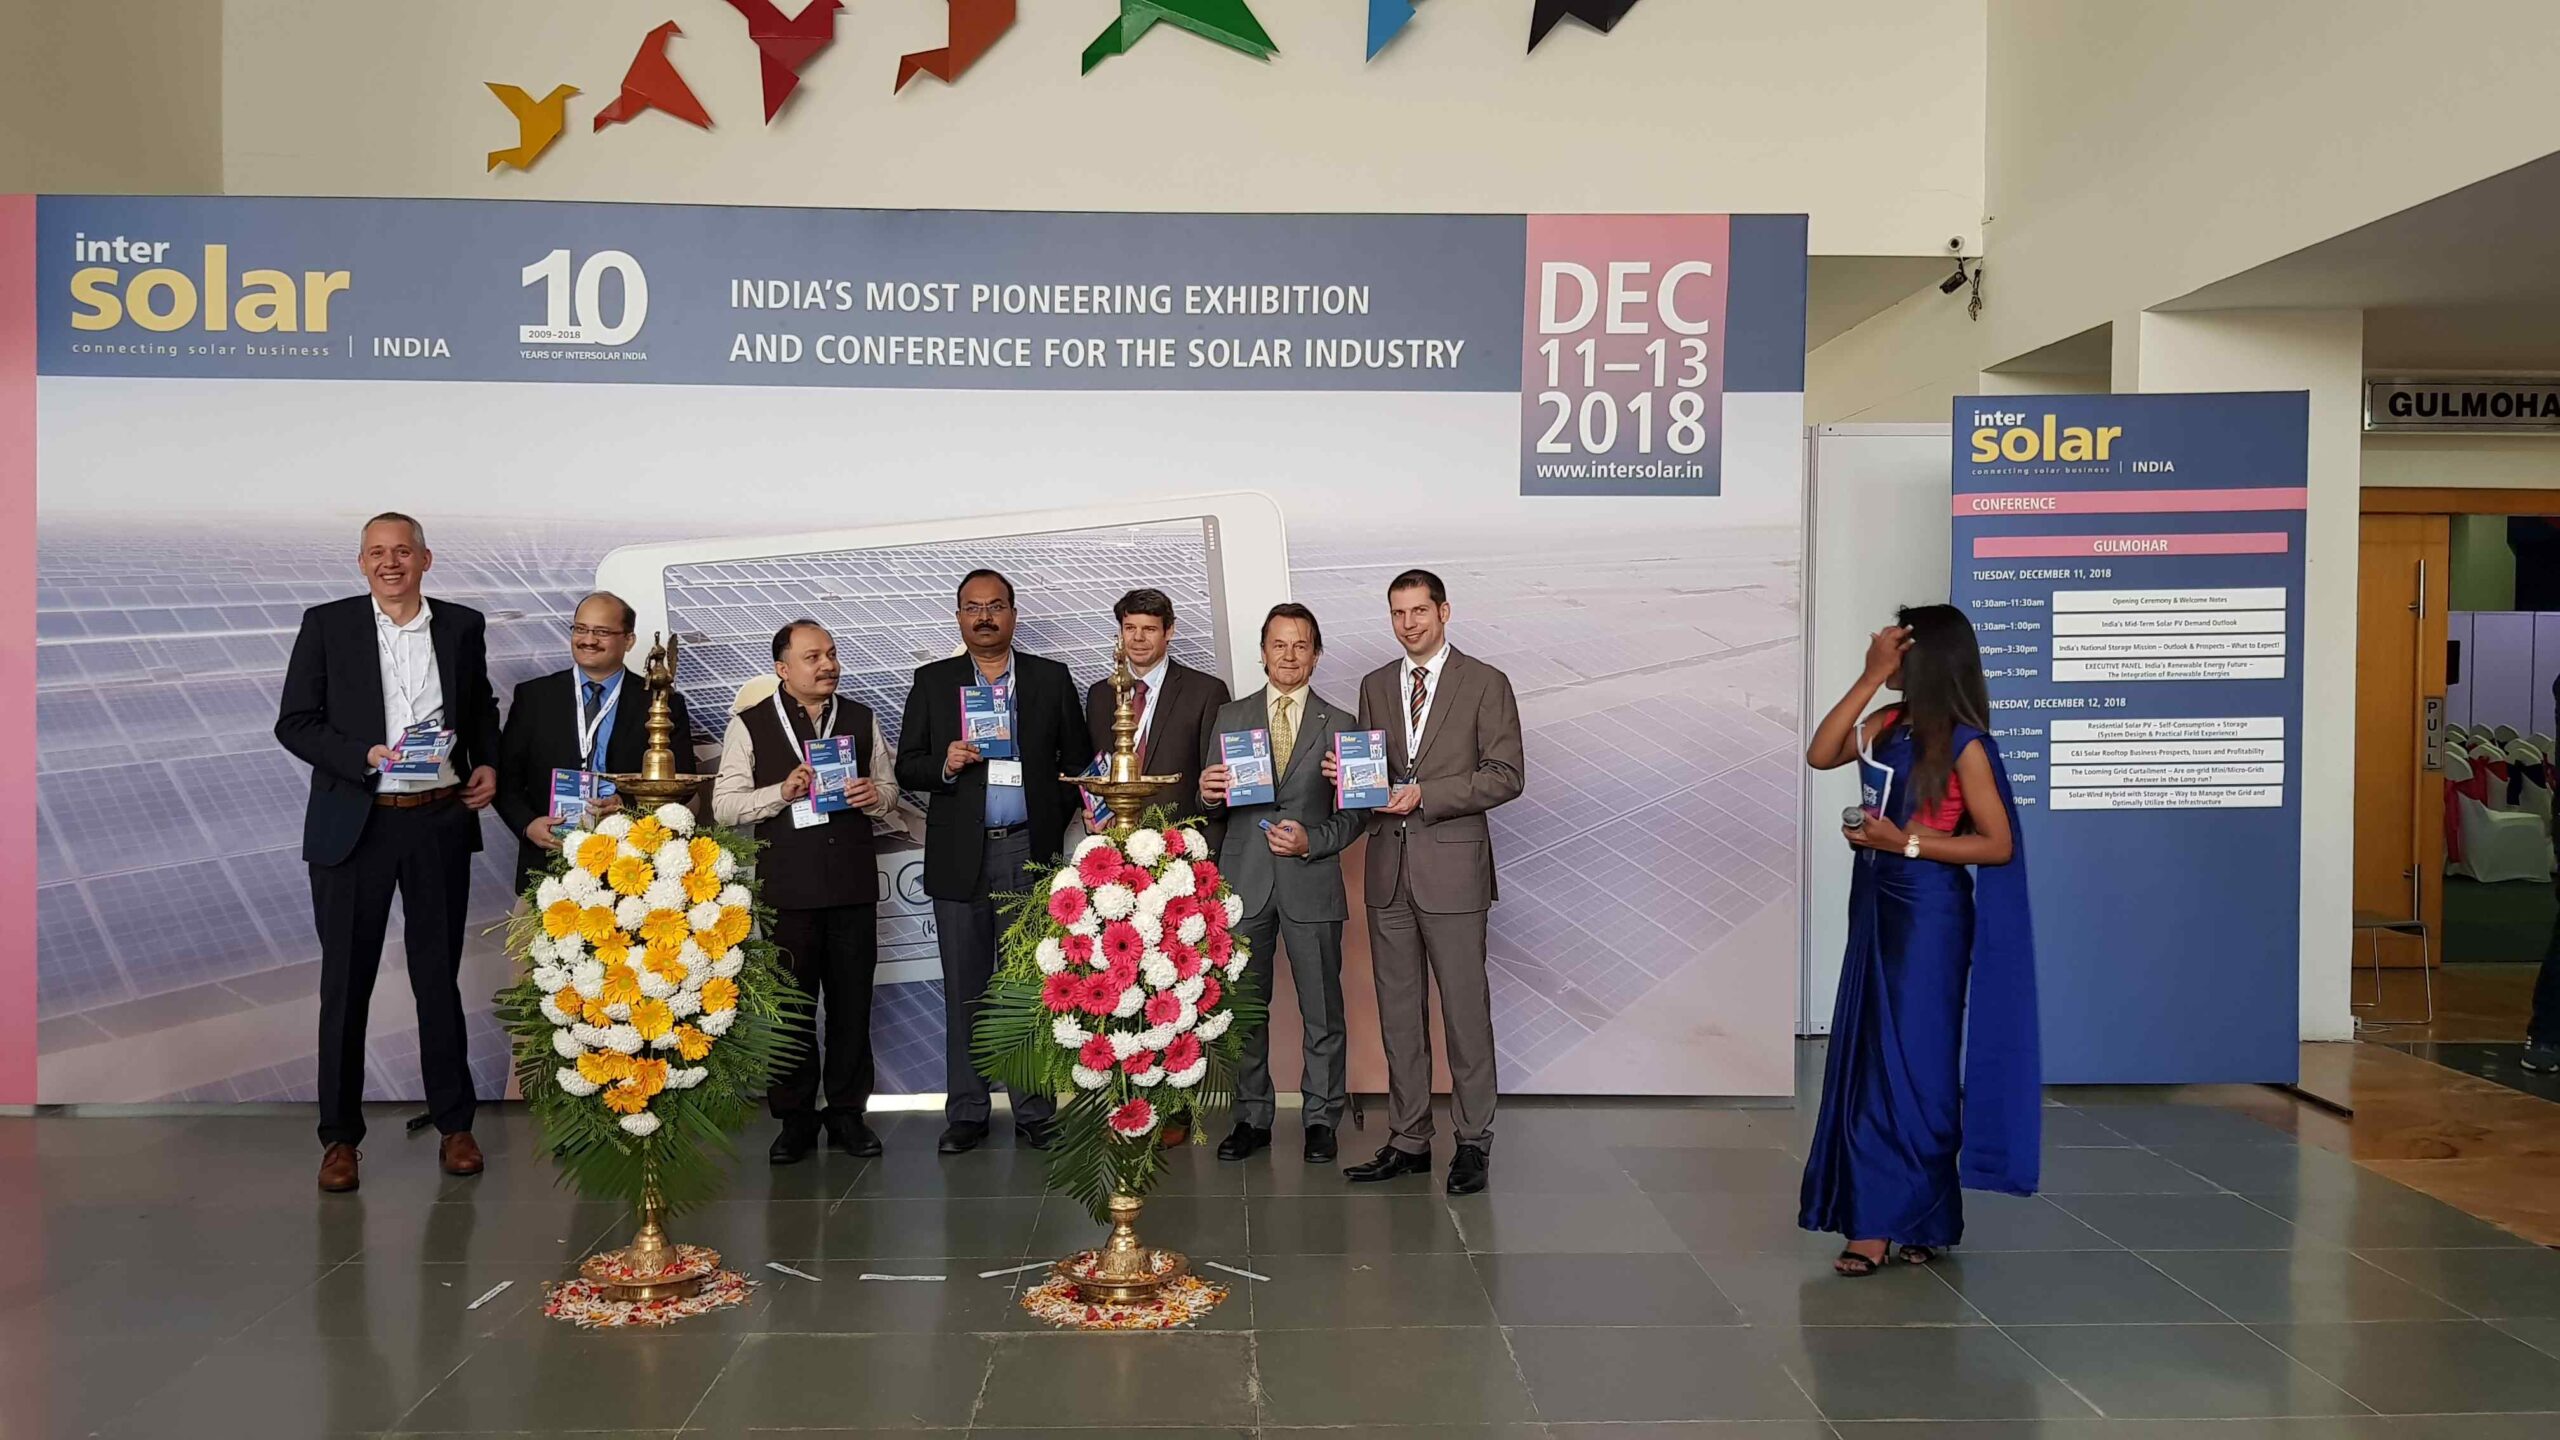 Intersolar India with 17,000 business professionals and 300 exhibitors